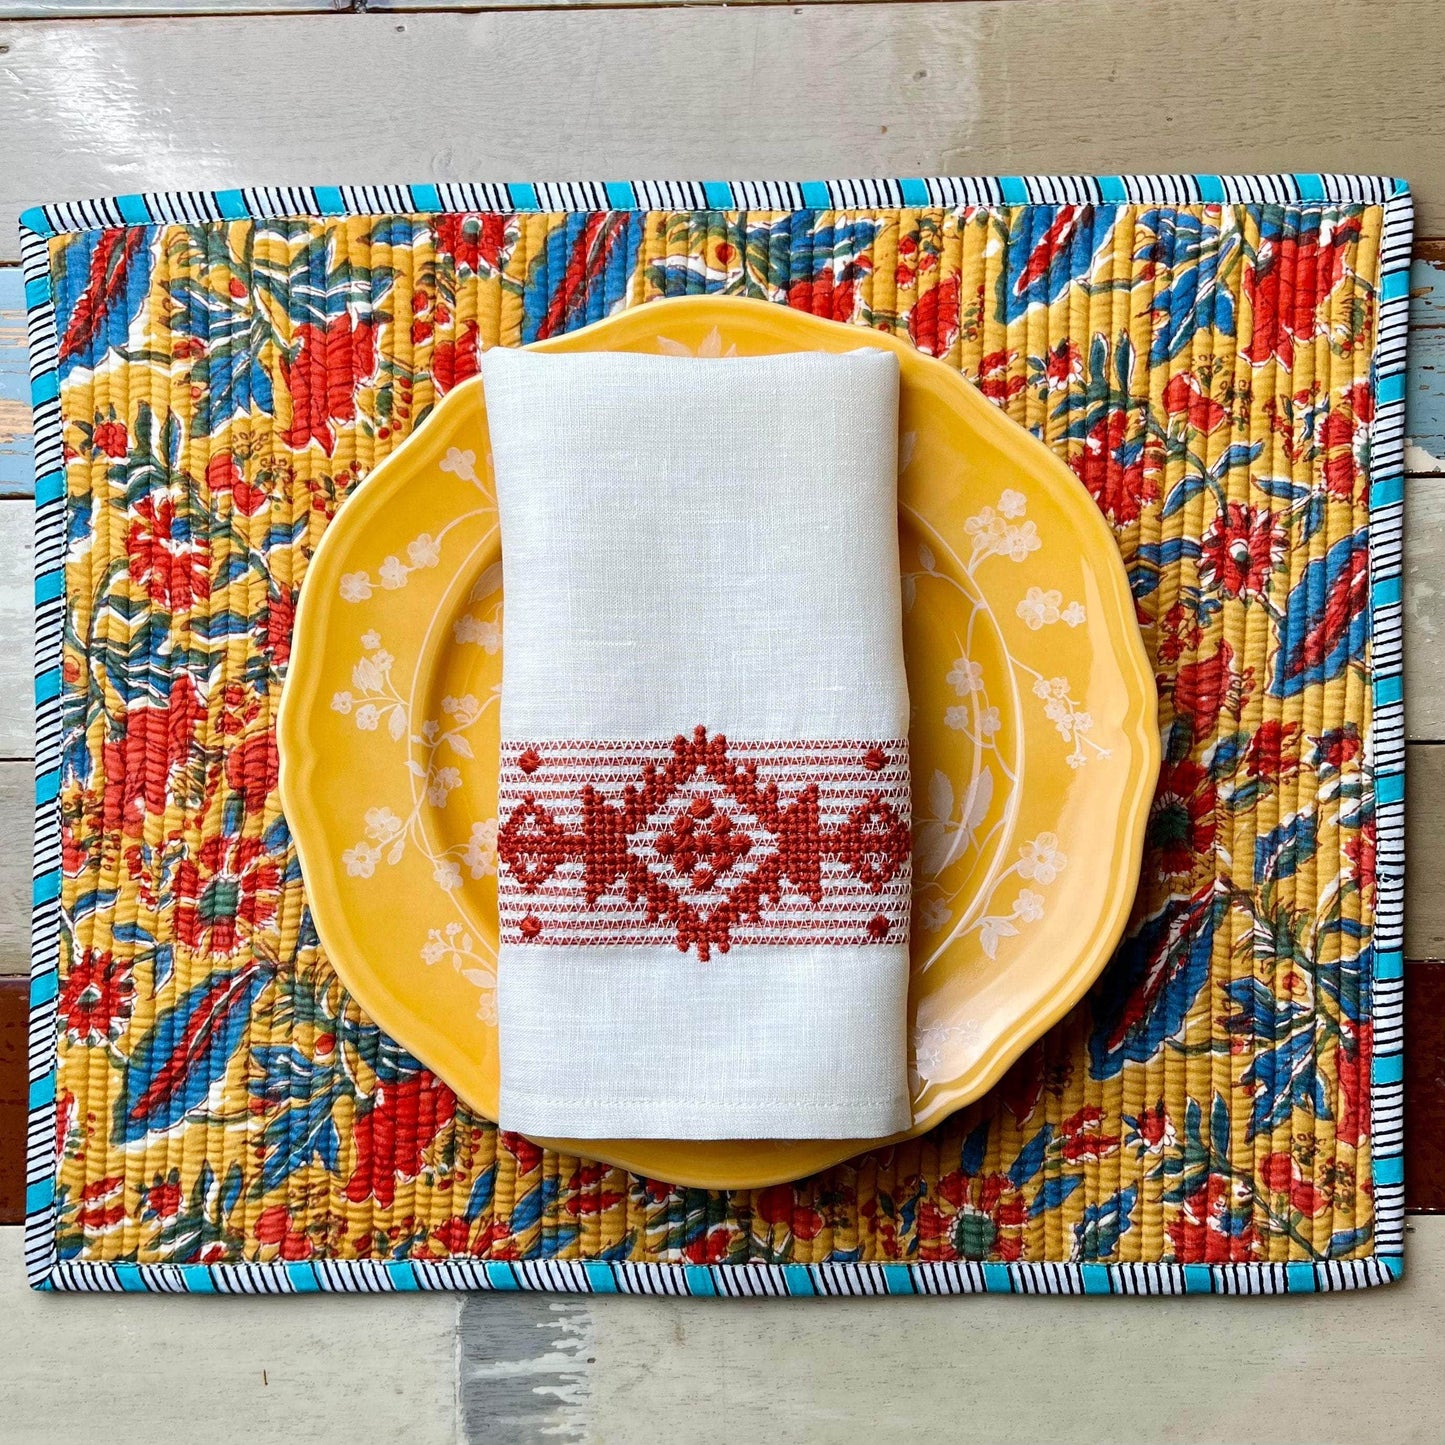 The Breakfast Placemat - Pink / Mustard / Red / Turquoise / White | Sold as a Pair